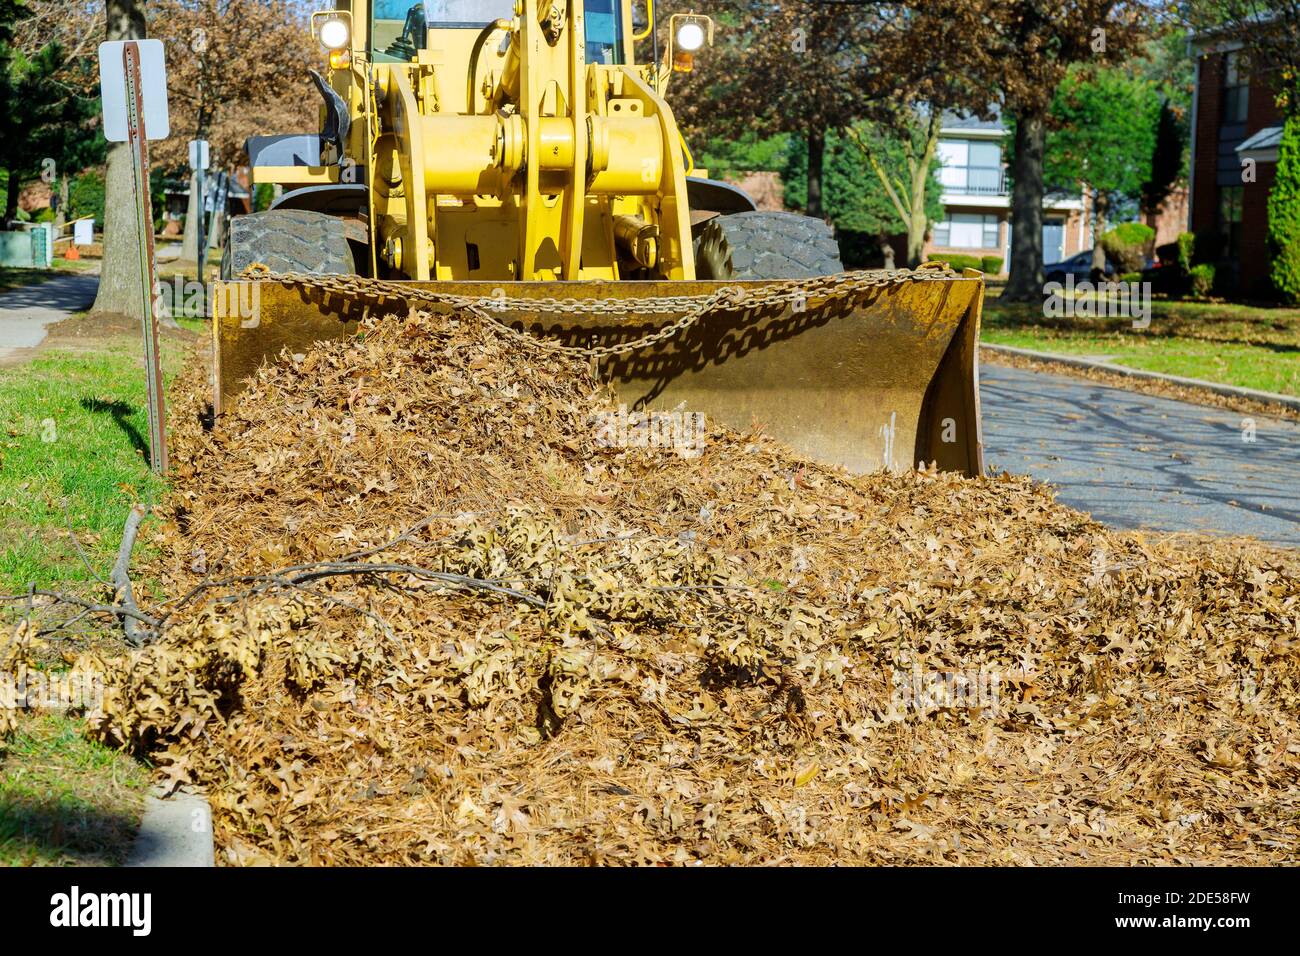 Cleaning in the fallen down fall of foliage leaves with a tractor in the city Stock Photo